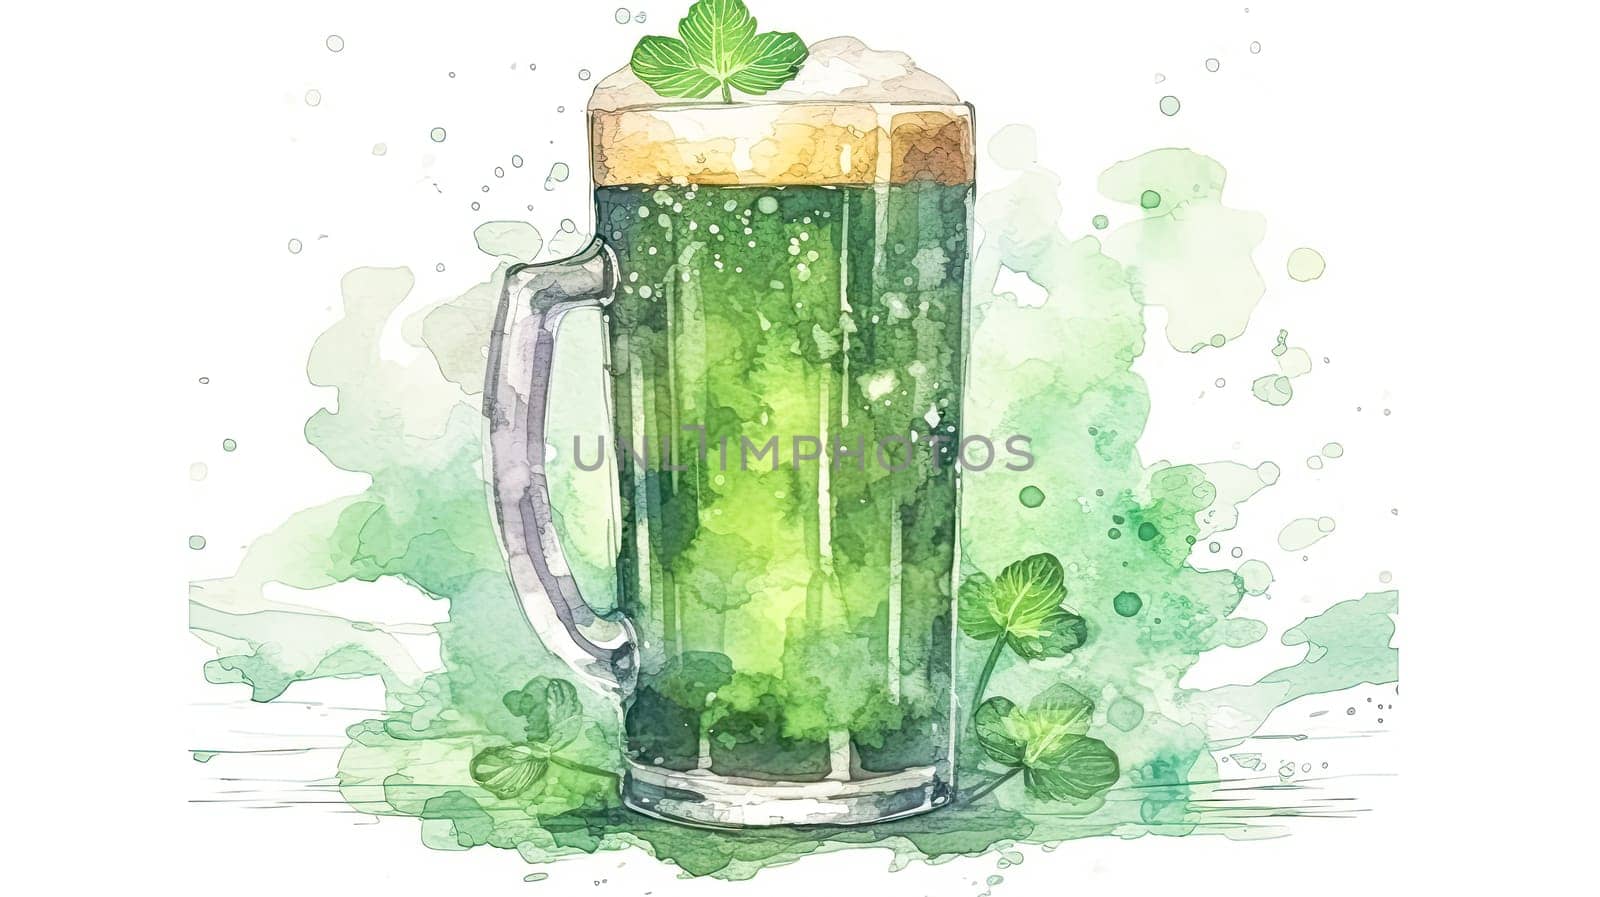 Celebrate St. Patricks Day with the charm of green beer, depicted in a lively watercolor scene